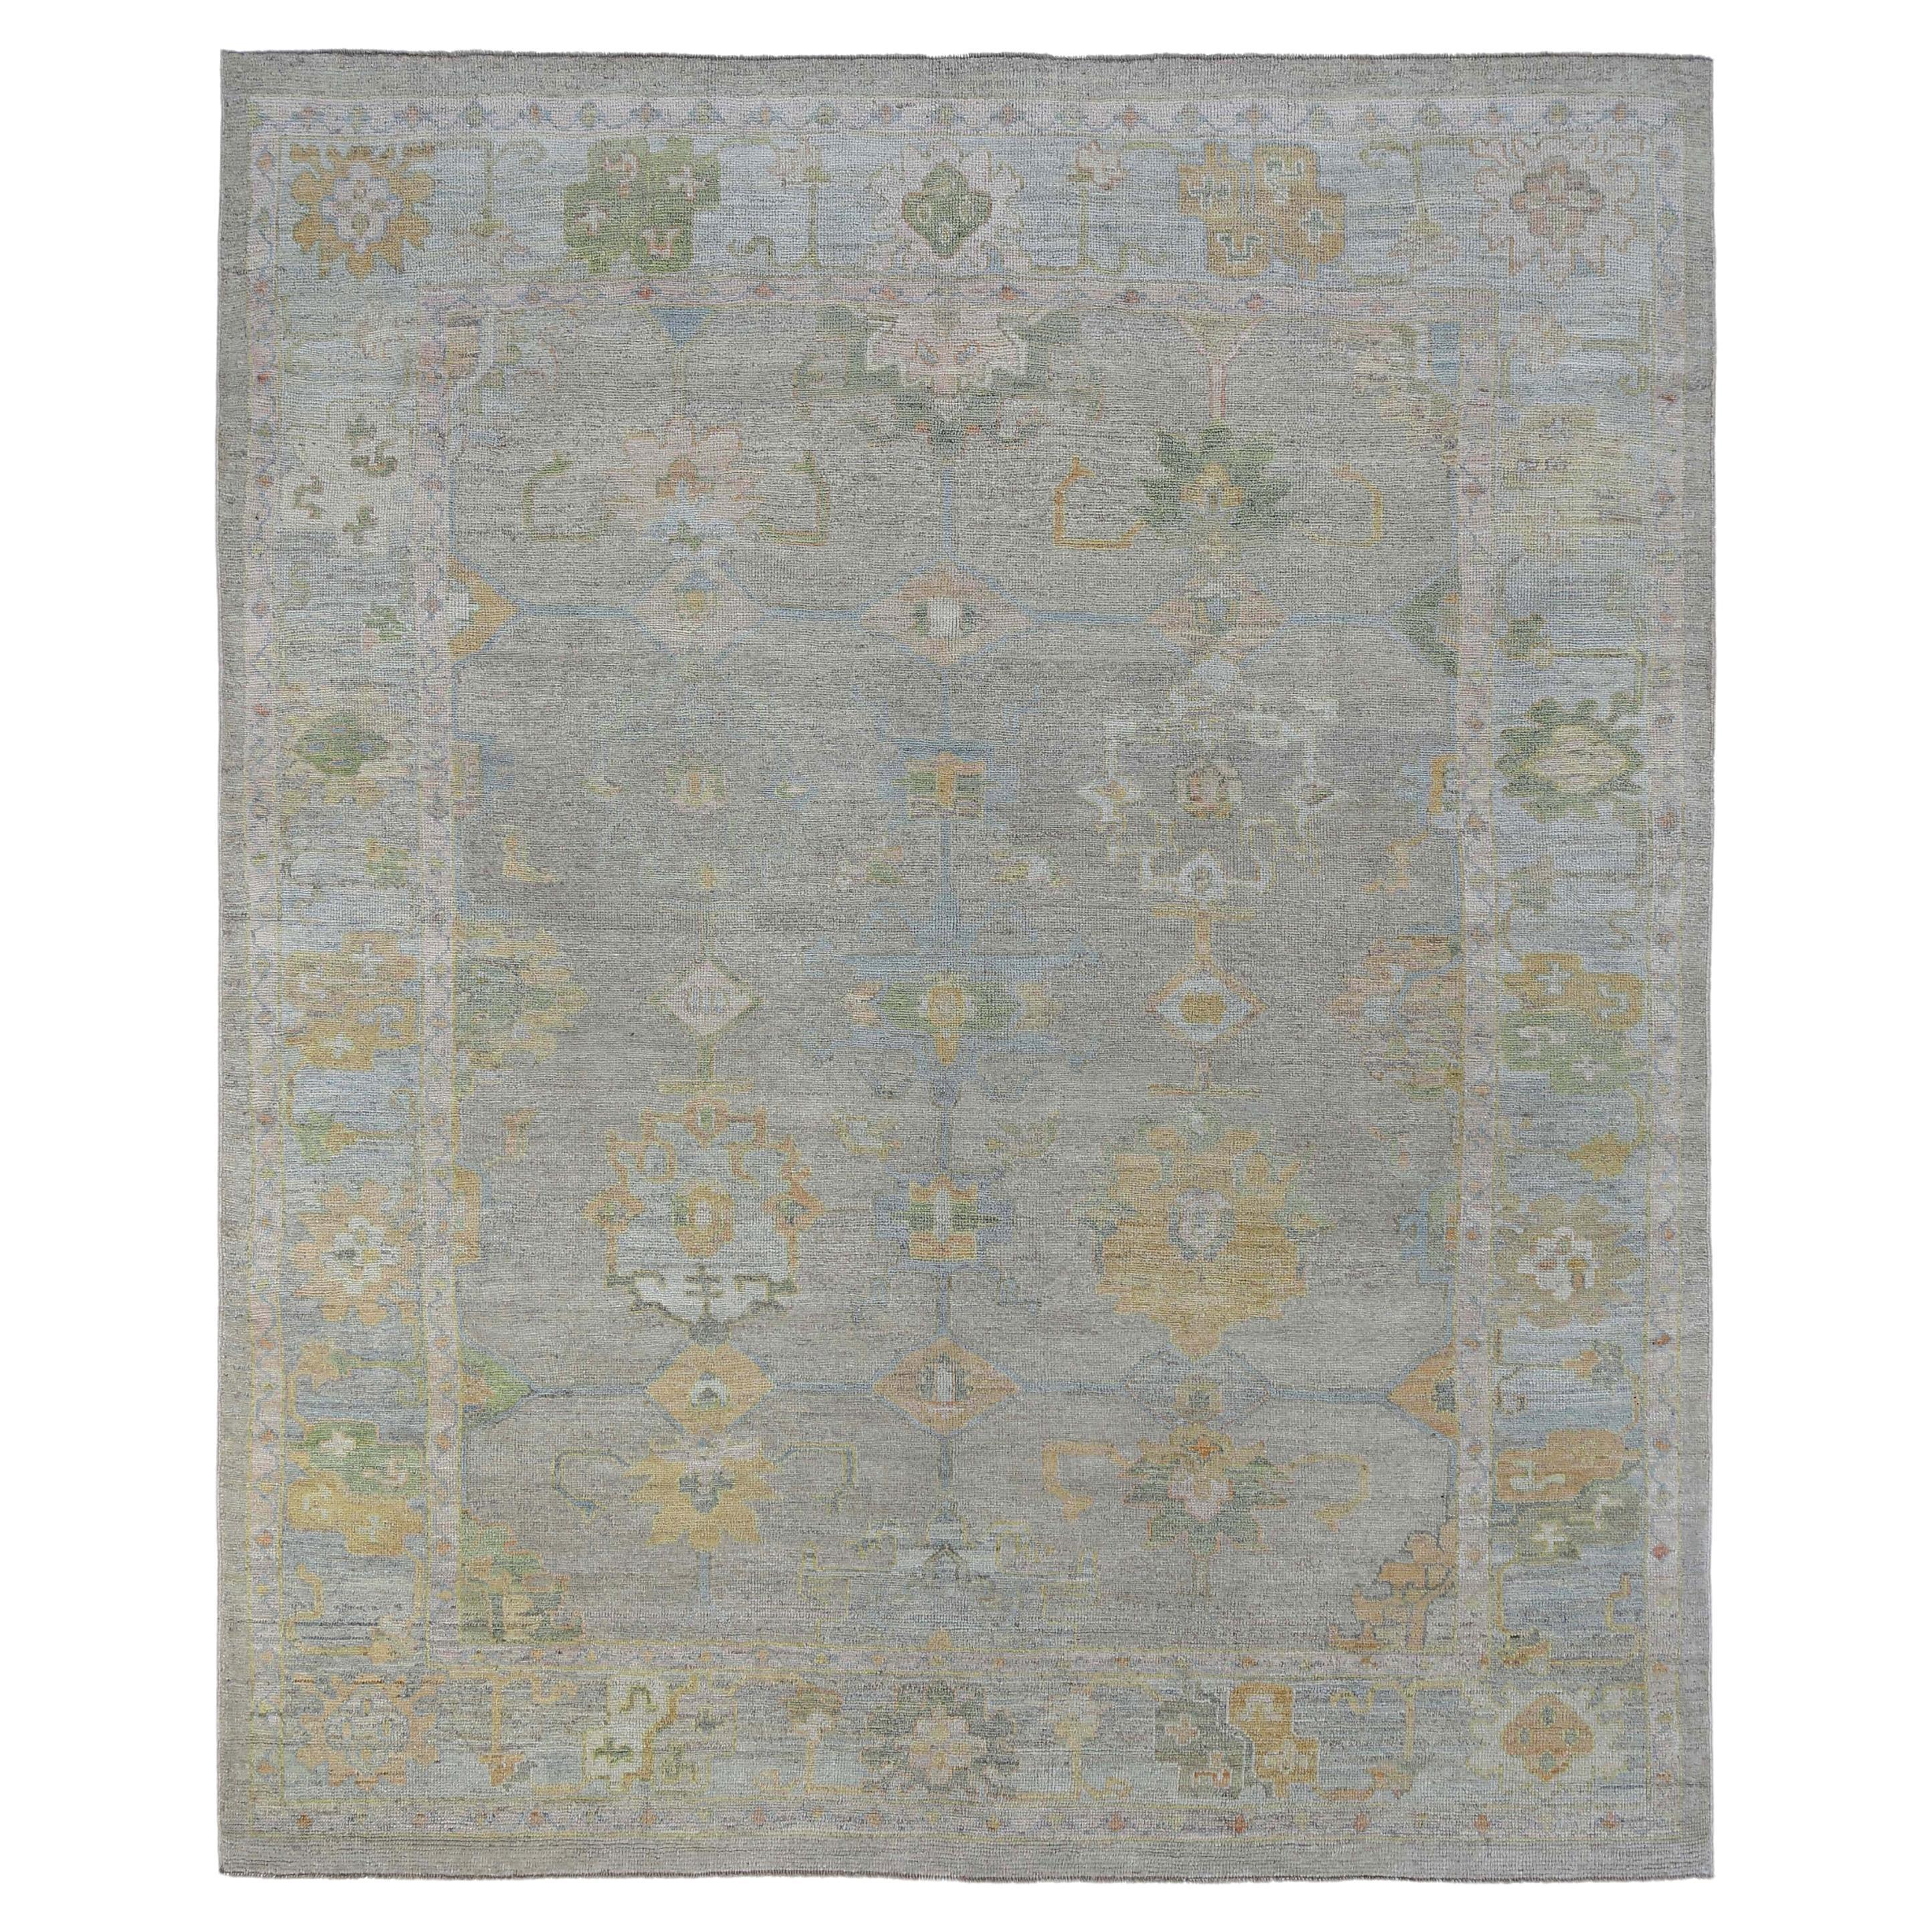 New Turkish Oushak Rug with Muted Blue Color Tones